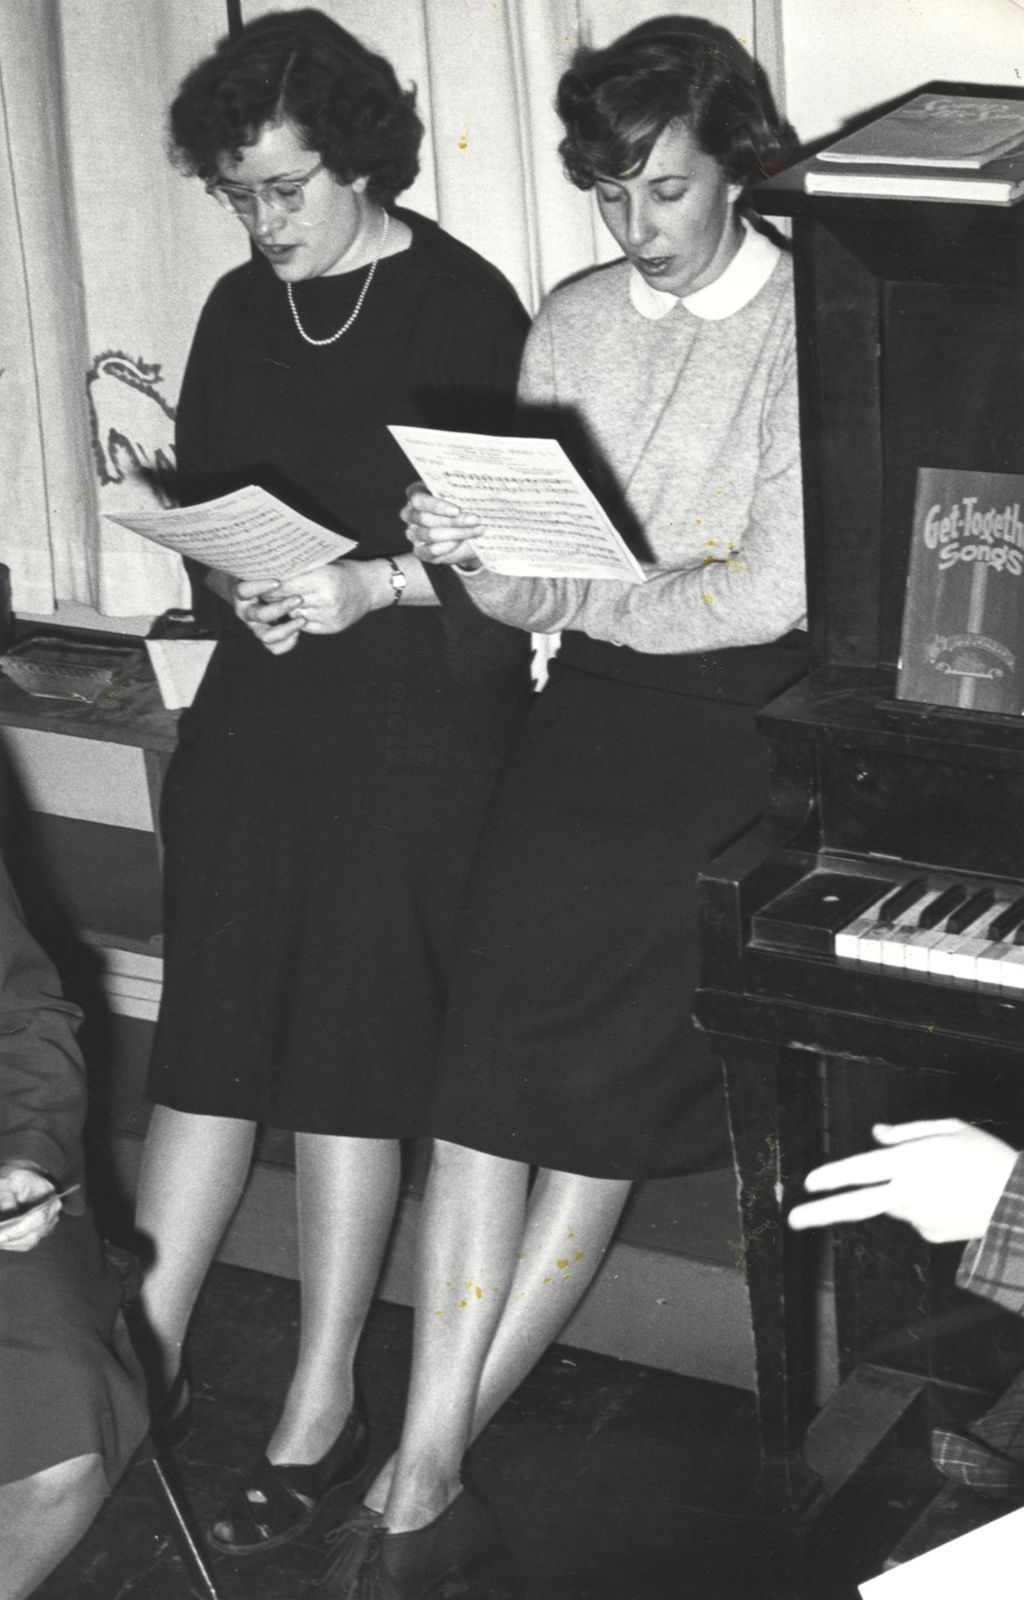 Two young women singing next to piano